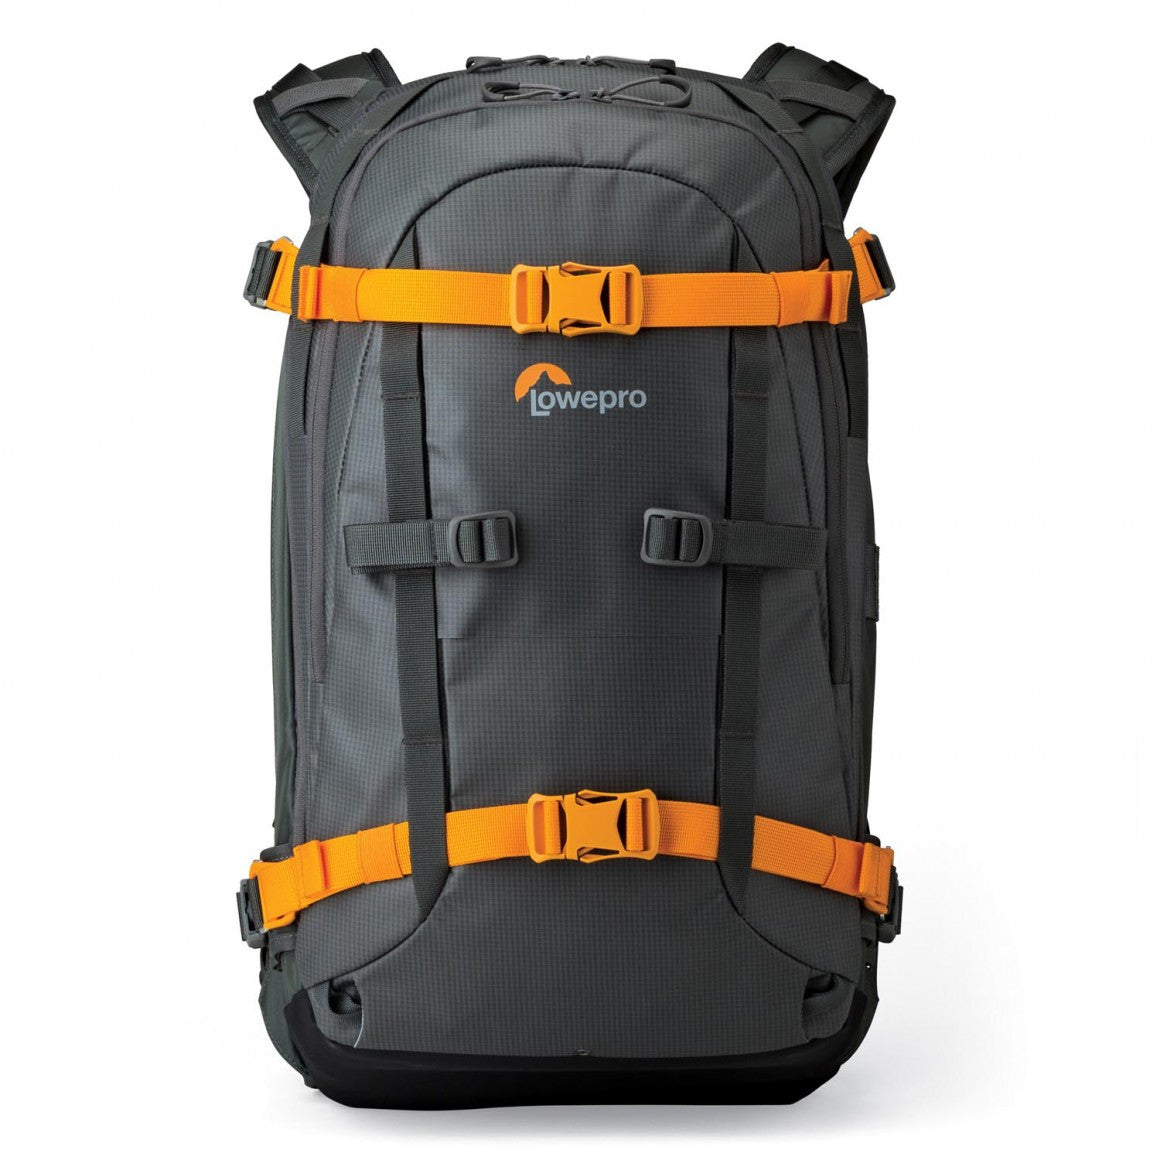 Lowepro Whistler 350AW Backpack (Grey), bags backpacks, Lowepro - Pictureline  - 1